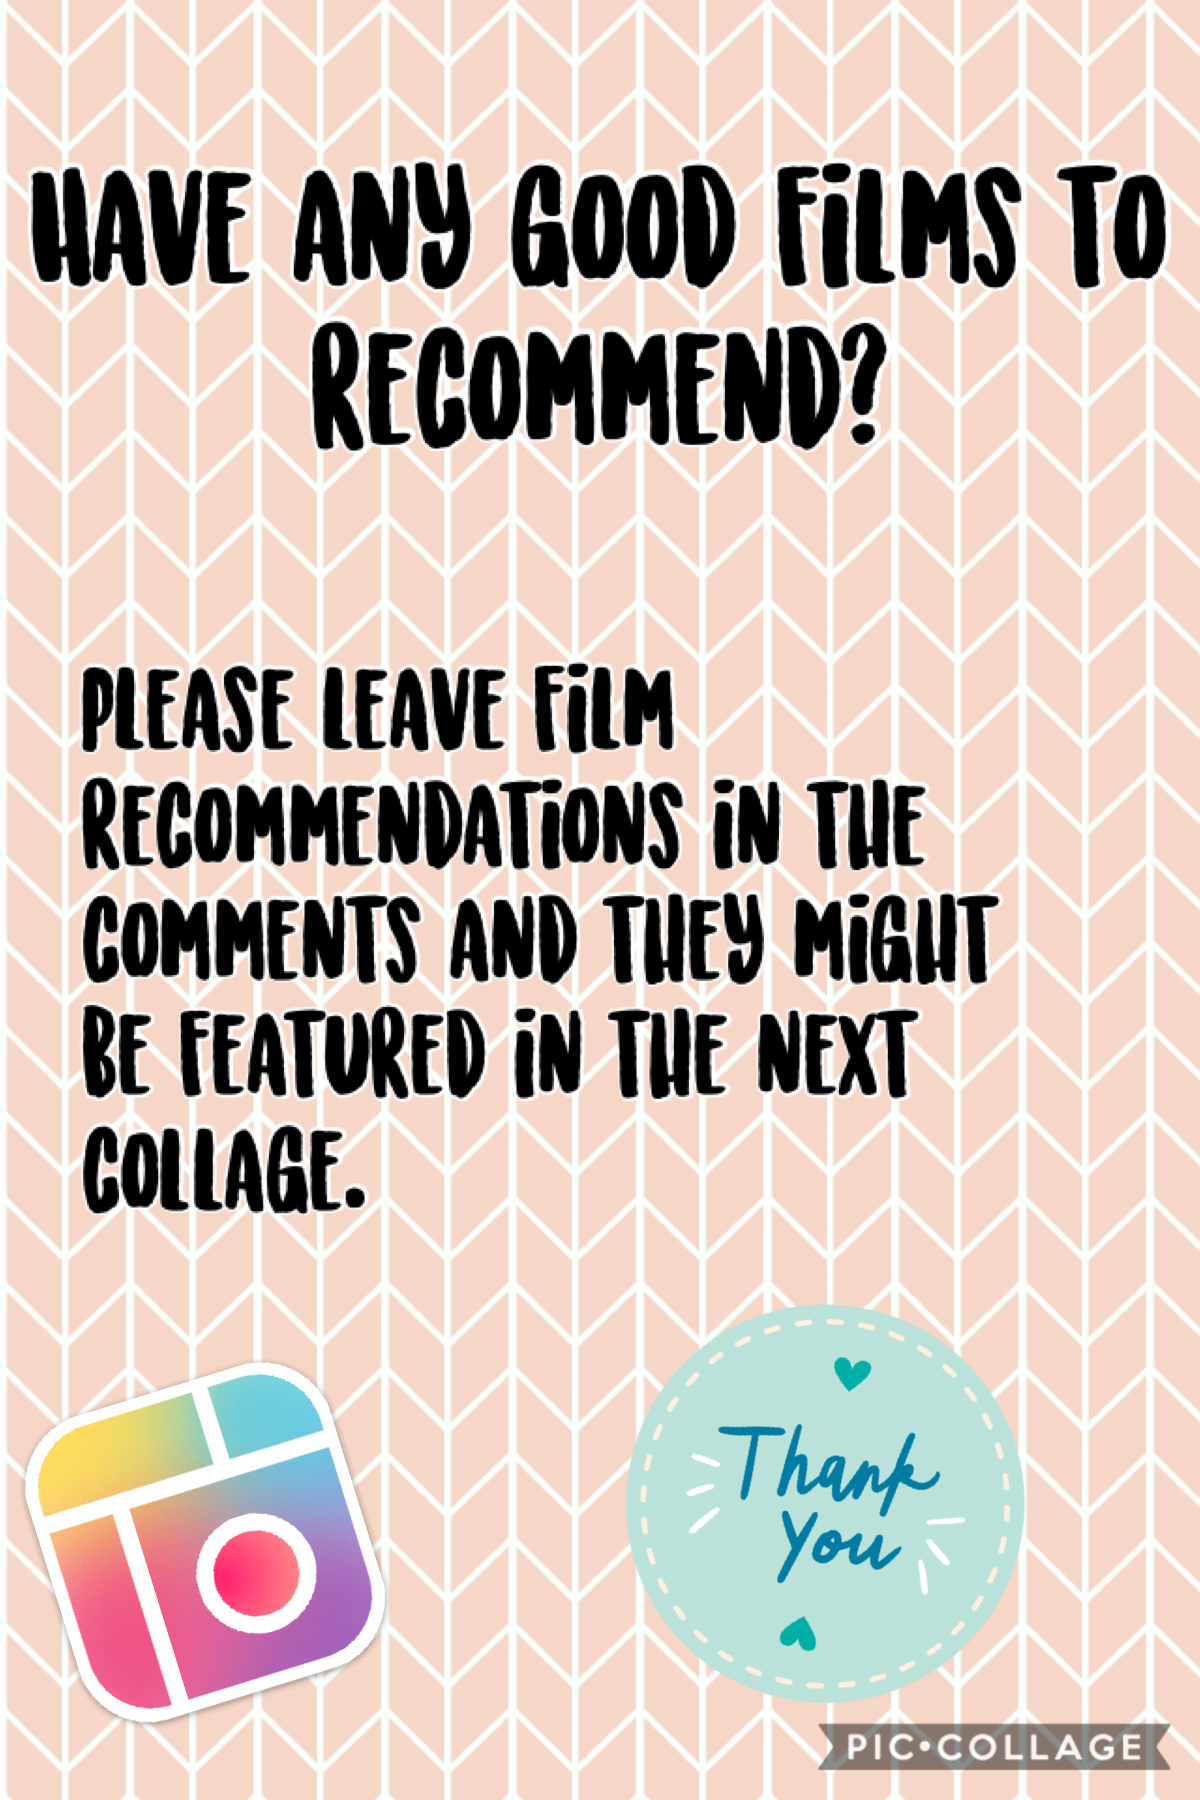 Film recommendations 😊